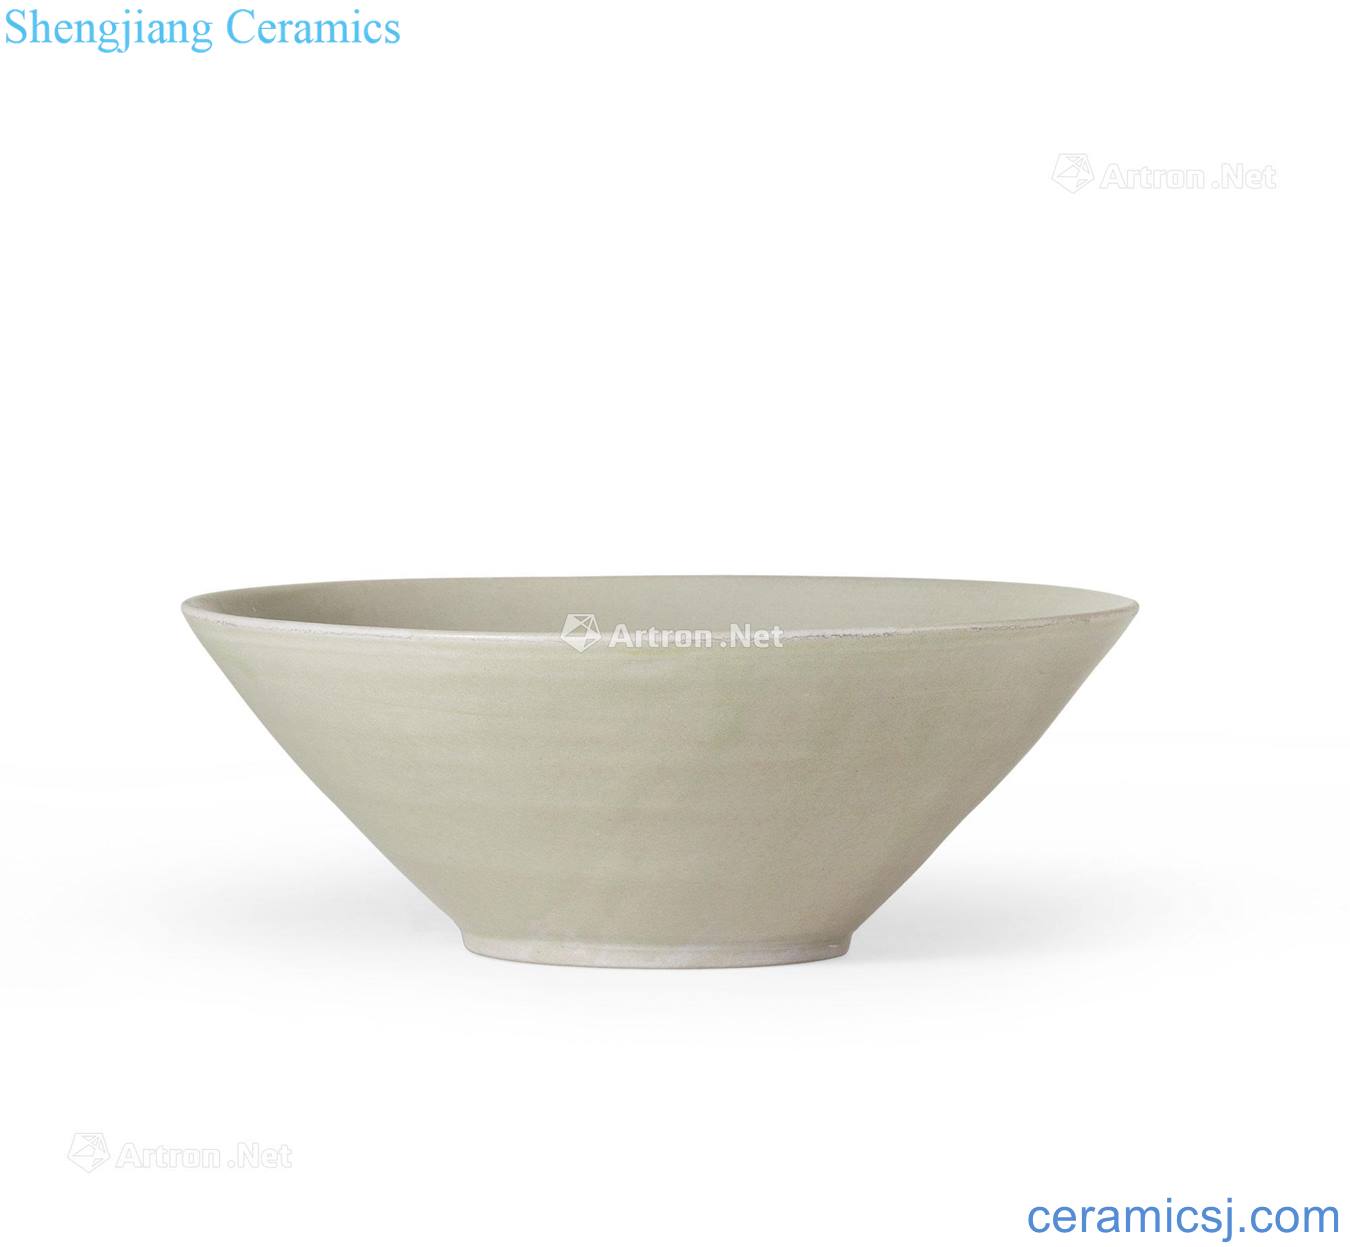 Ming yue ware honey colored bowls